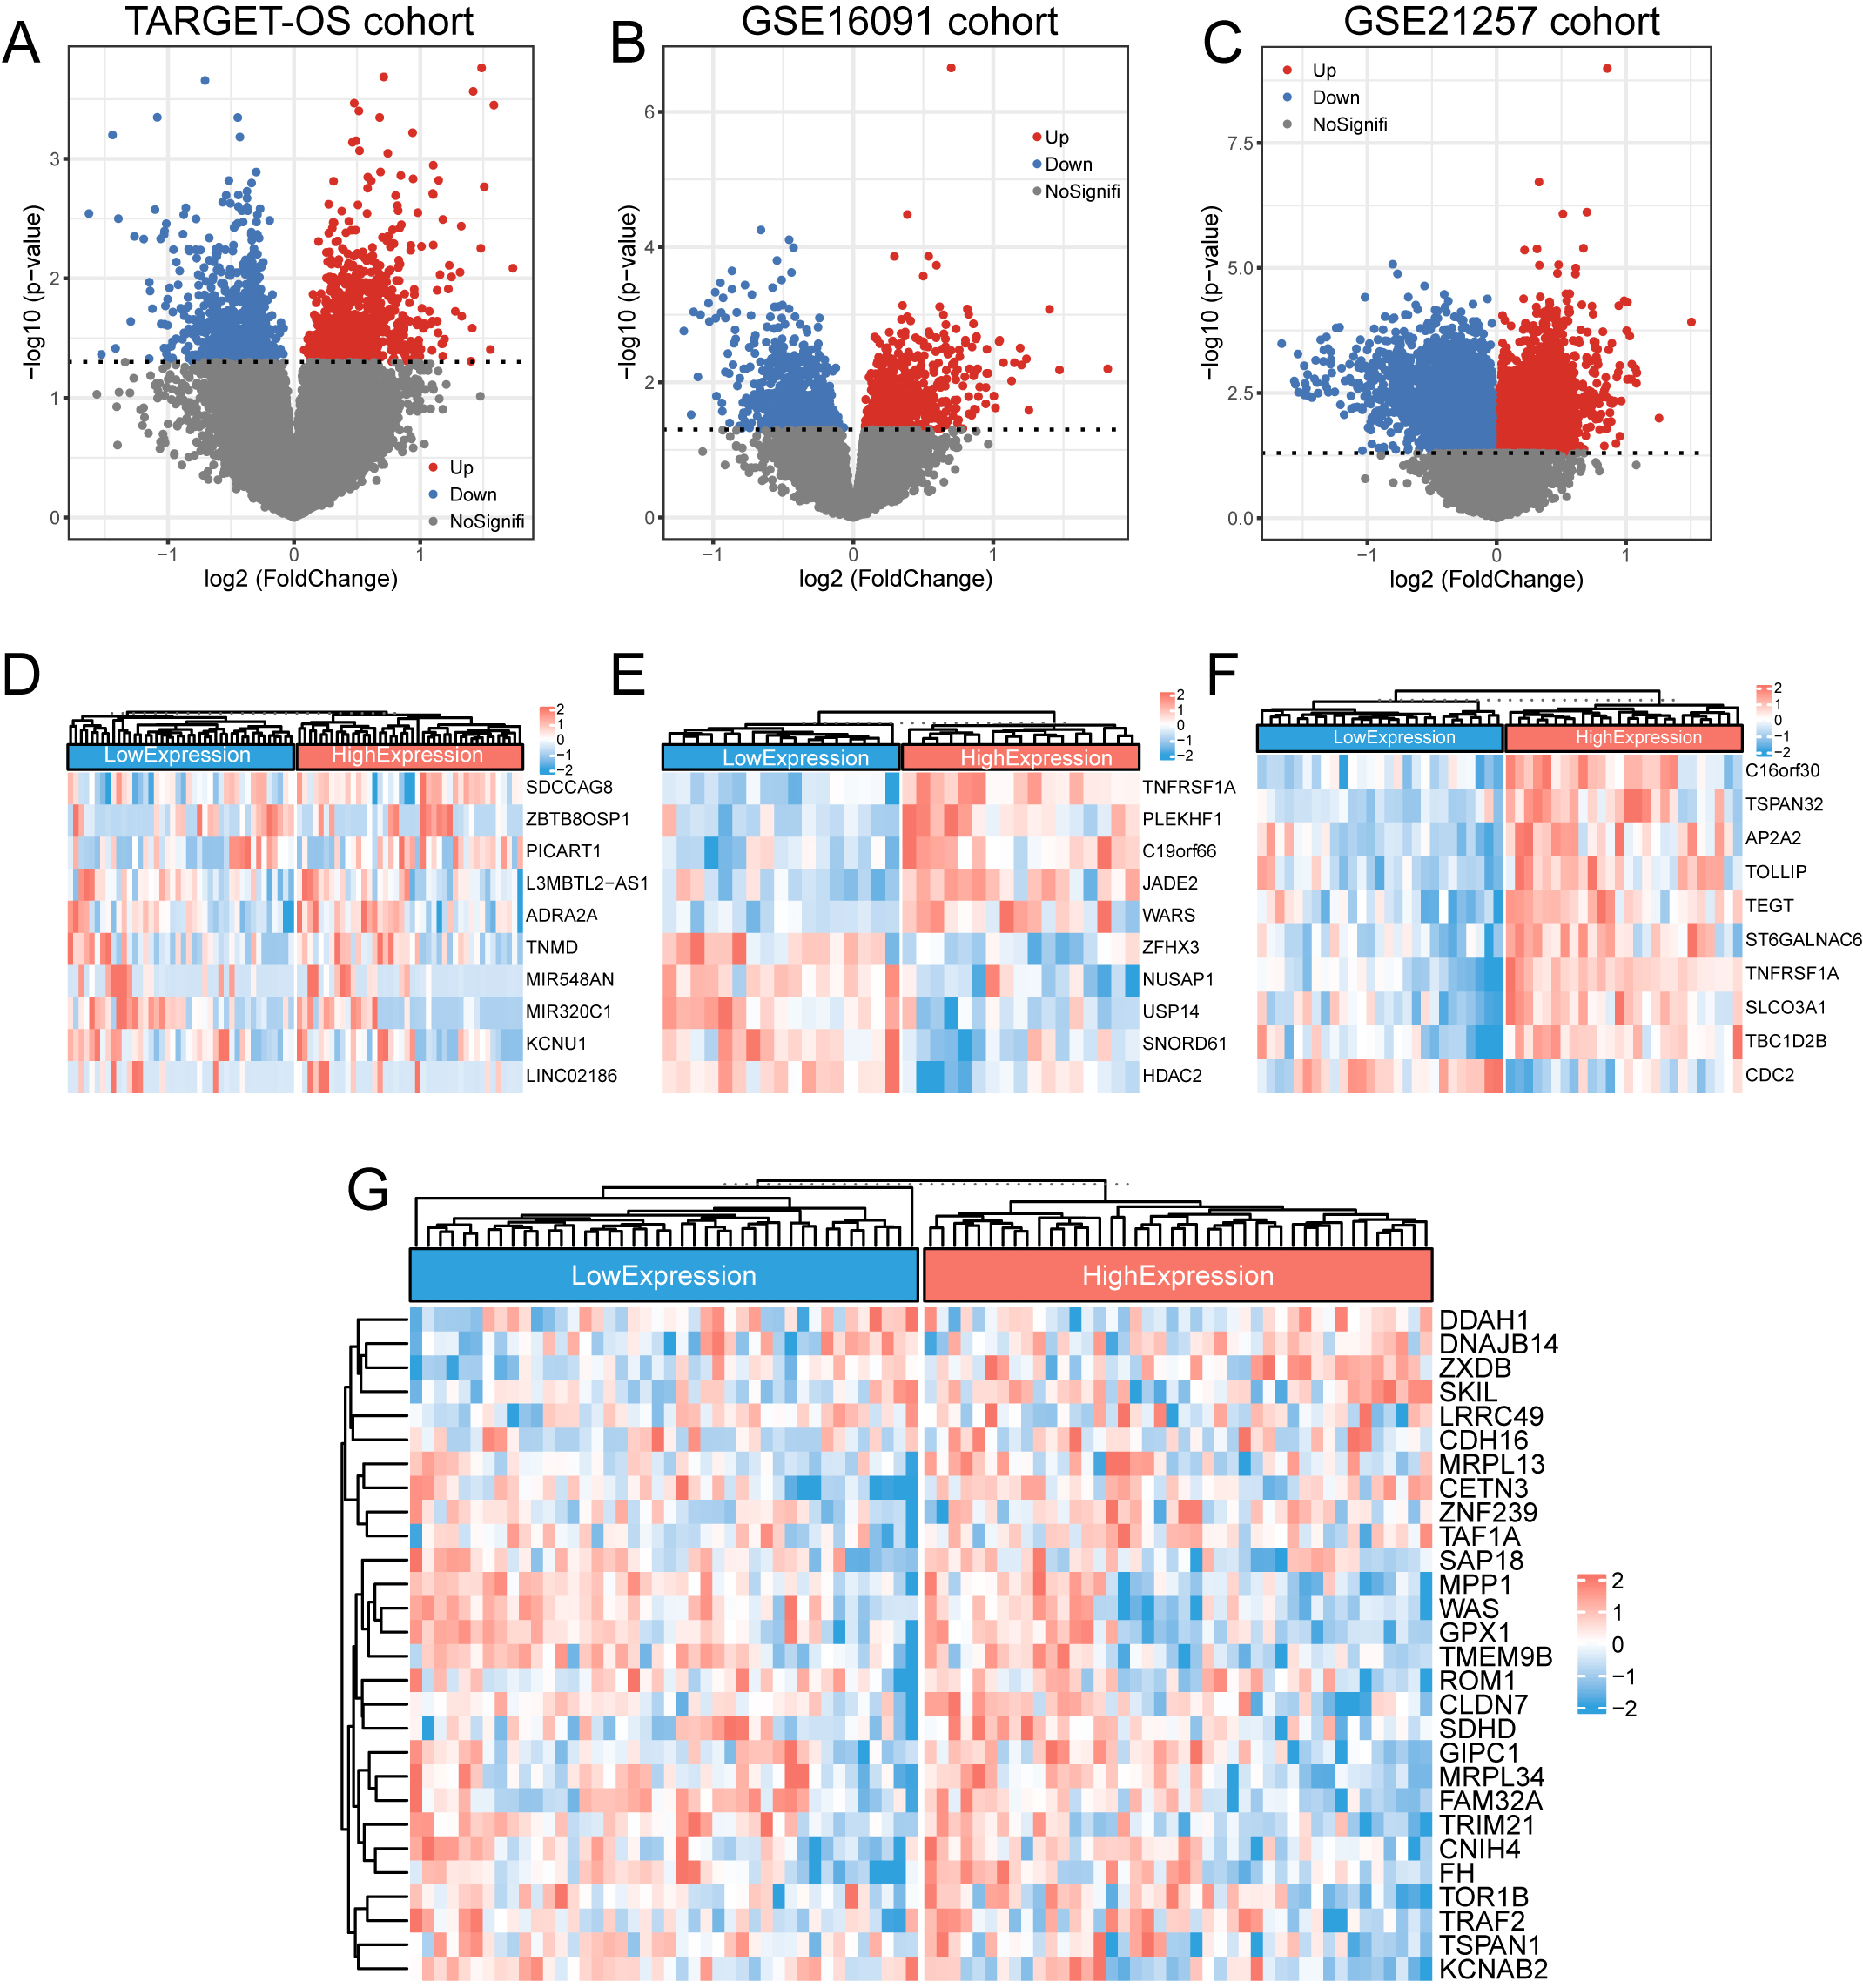 DEGs in the TNFRSF1A high- and low-expression groups. (a–c) The DEGs of the TARGET-OS cohort and GSE16091 and GSE21257 datasets were screened and plotted for volcanoes, respectively, with blue representing downregulated genes and red representing upregulated genes. (d–f) Heatmaps of the top 10 DEGs in the TARGET-OS cohort and GSE16091 and GSE21257 datasets, respectively. (g) Clustered heat map of the expression profiles for the 28 DEGs common to the three datasets.